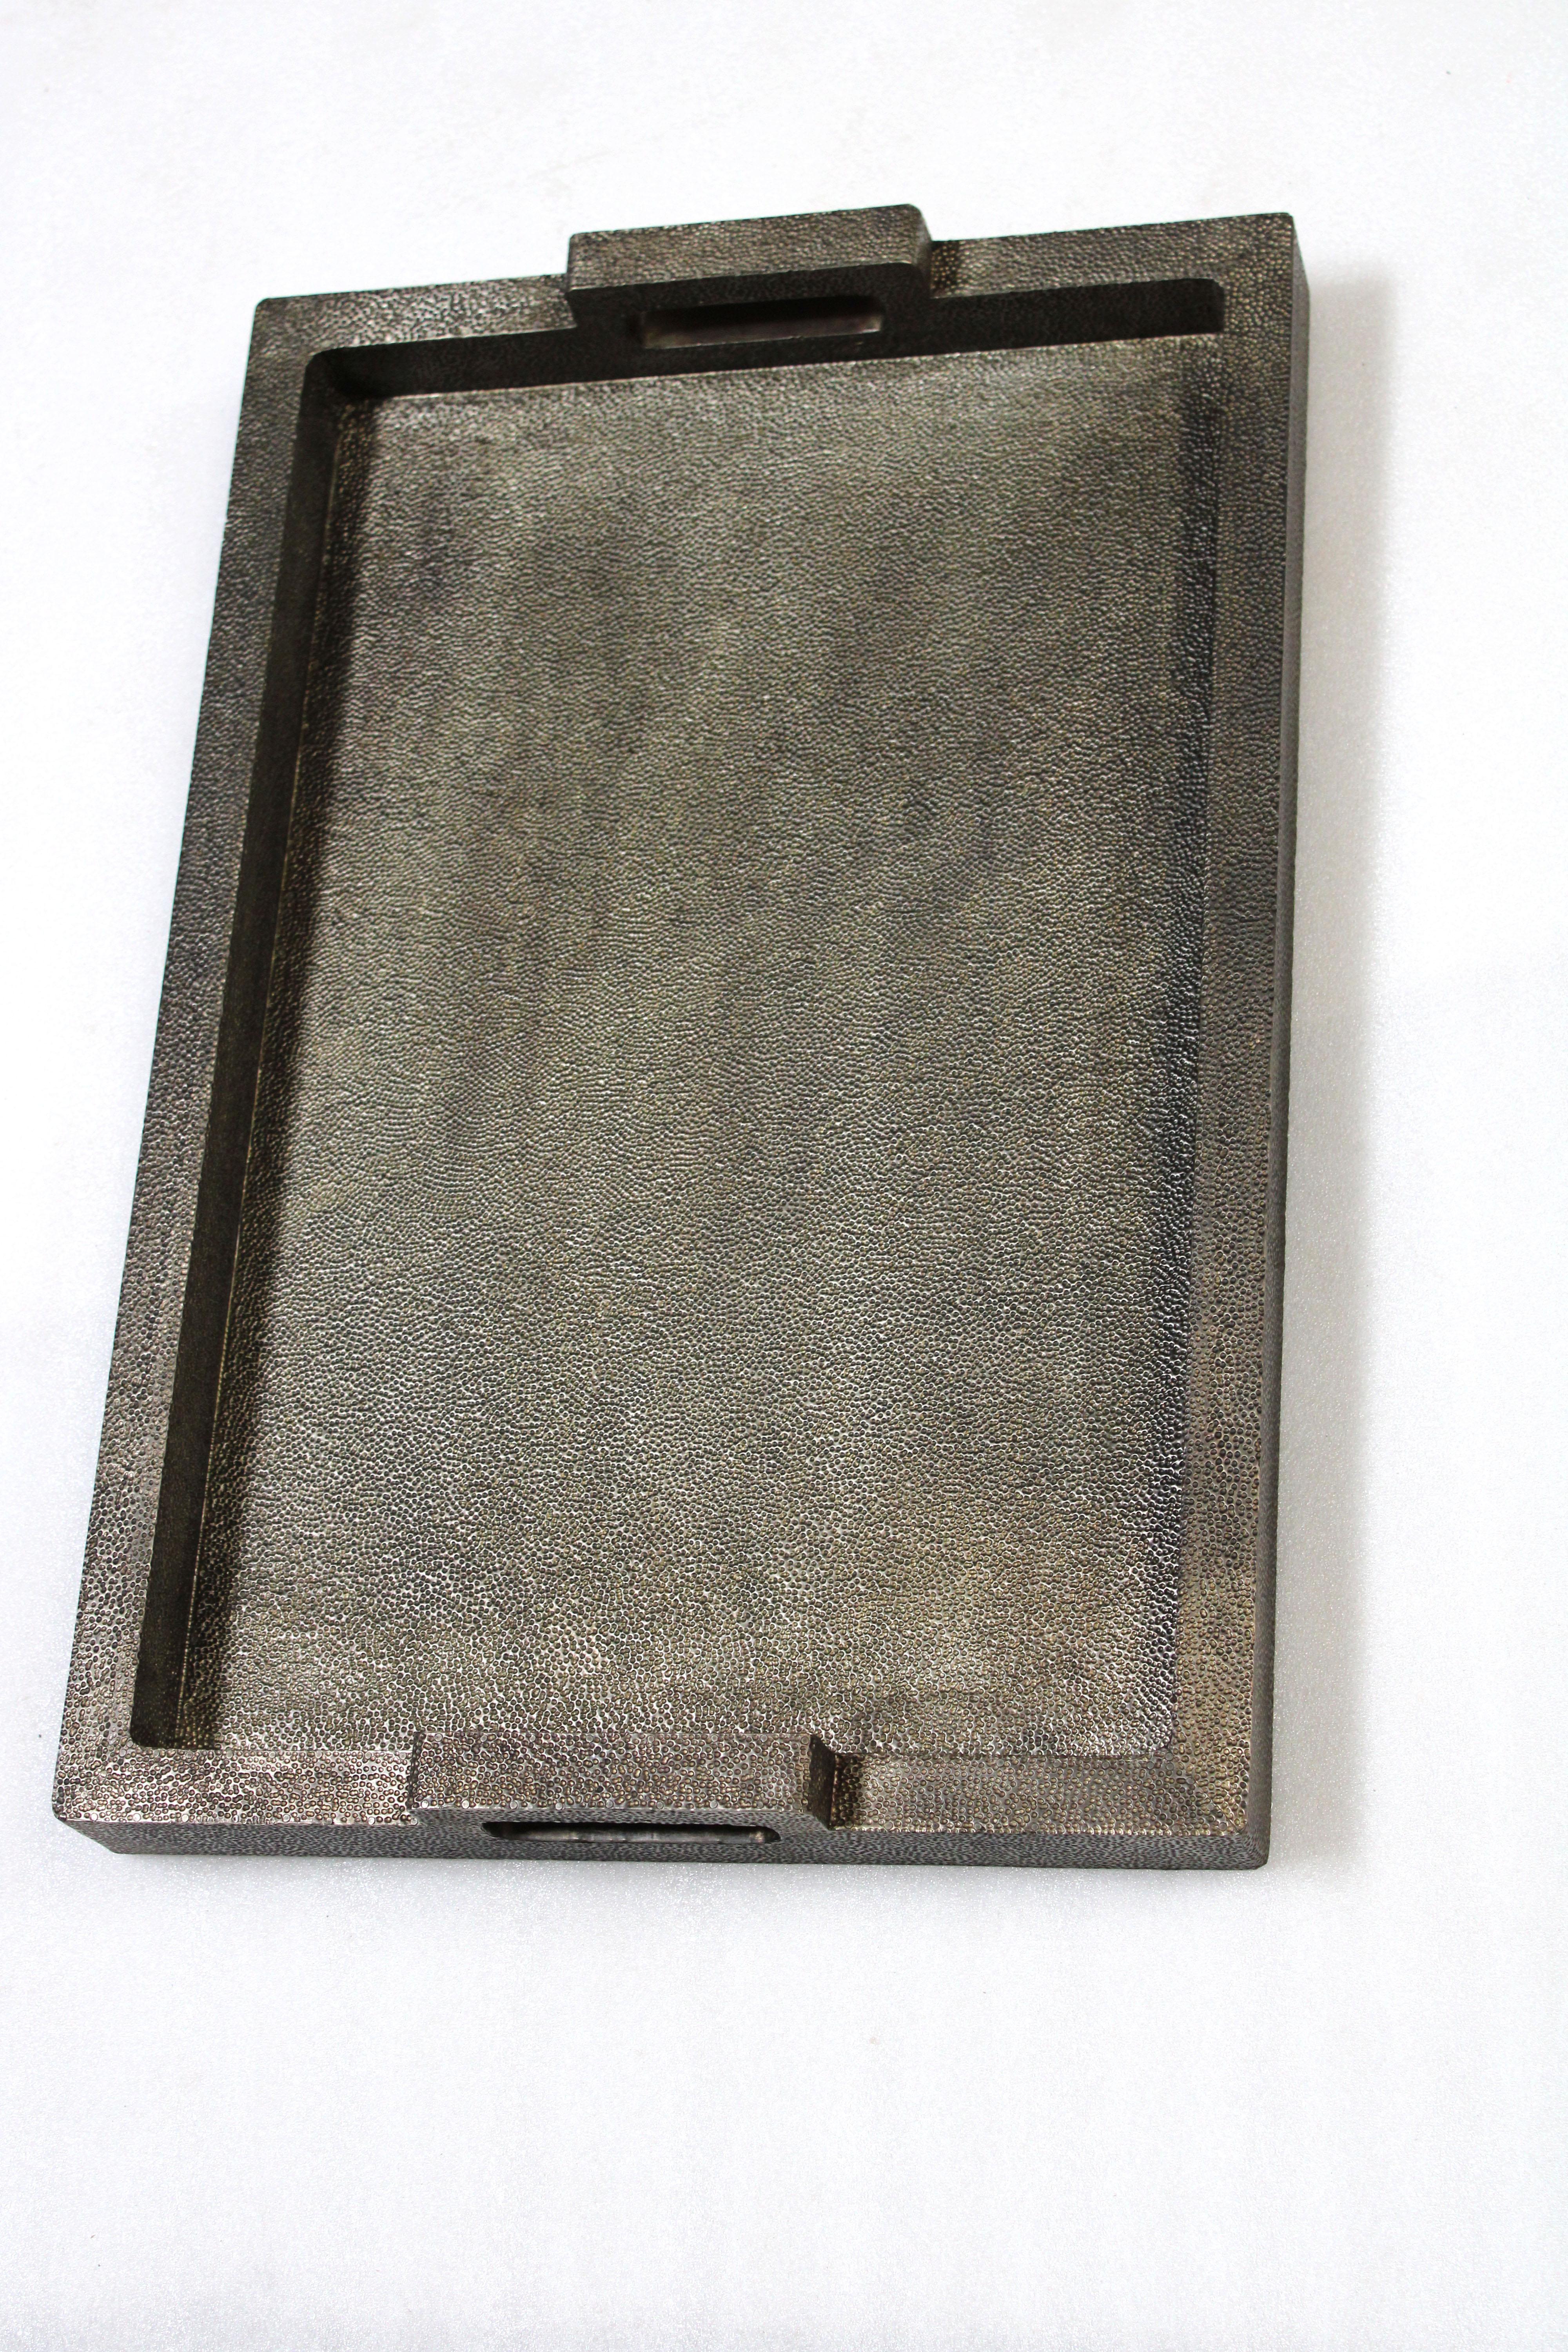 Other Rectangular Metal Tray in Antique Bronze Clad Over MDF by Stephanie Odegard For Sale